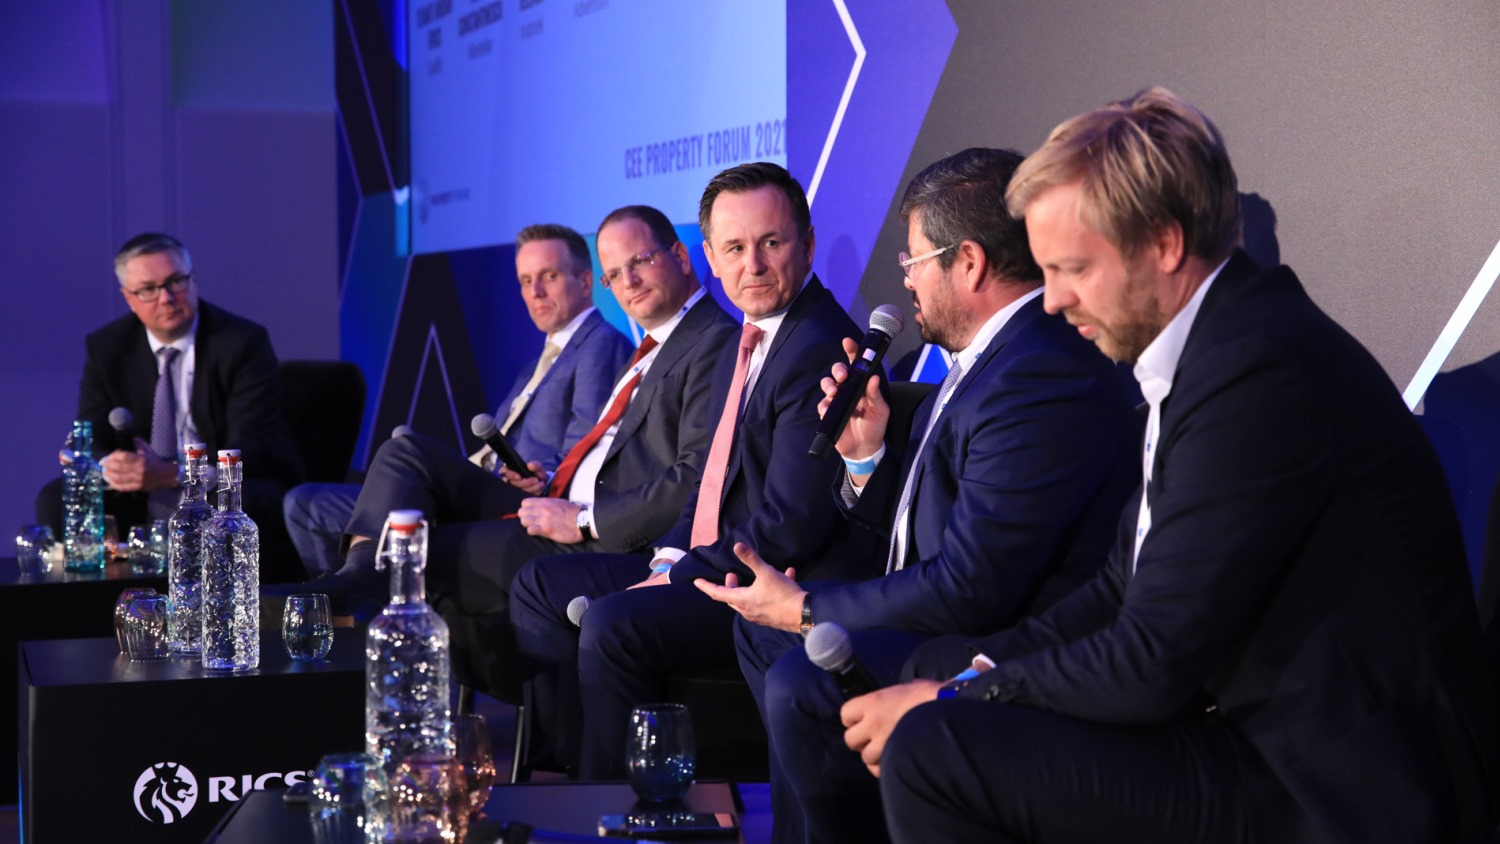 News Article CEE CEE Property Forum 2021 conference investment Property Forum report